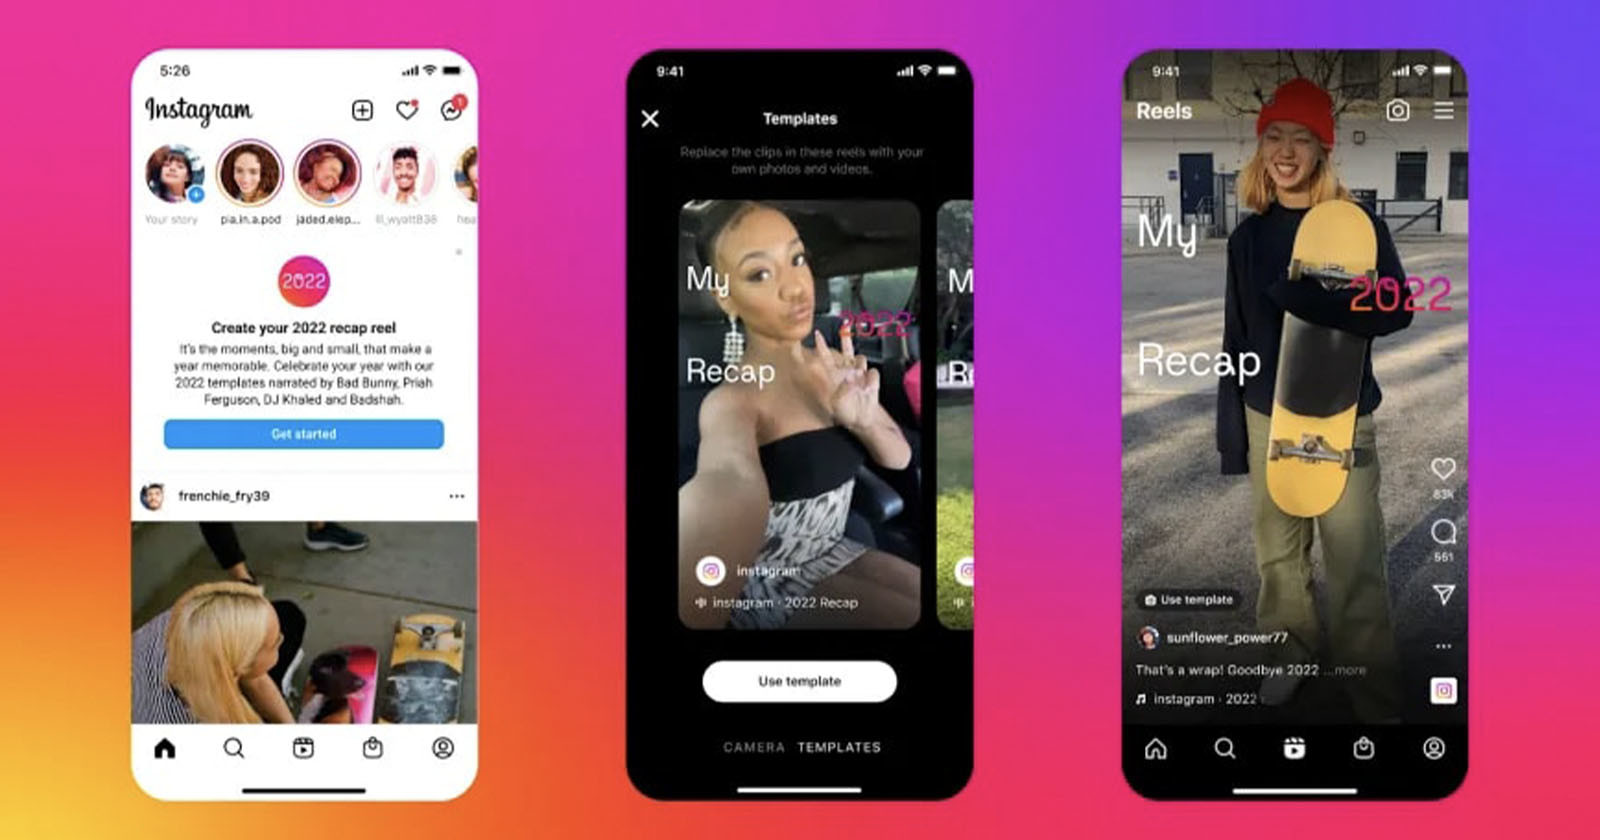 Instagram Lets You Create a 2022 Recap Reel From Your Photos